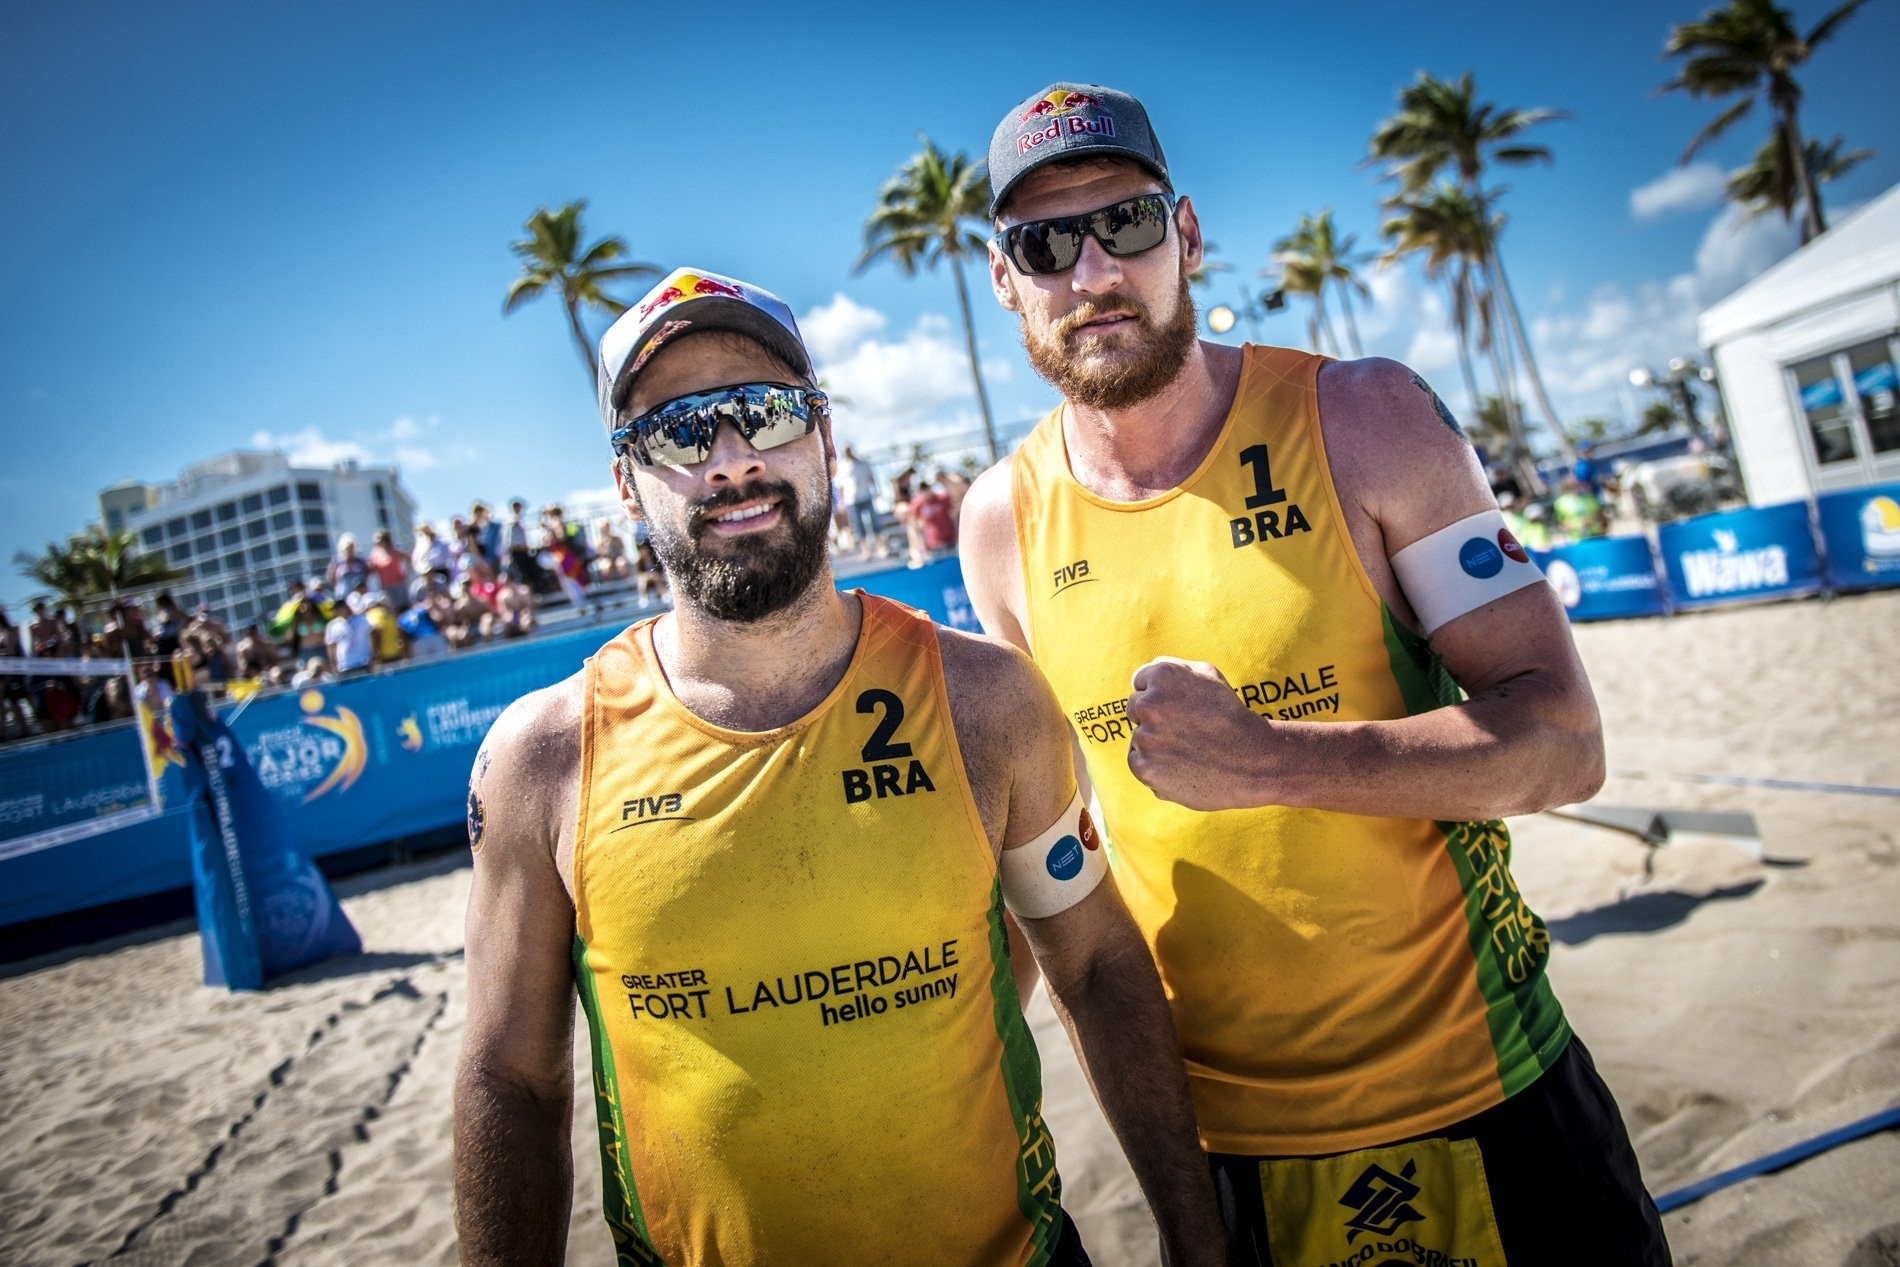 Olympic champions Alison Cerutti and Bruno Oscar Schmidt claimed victory in their pool ©FIVB